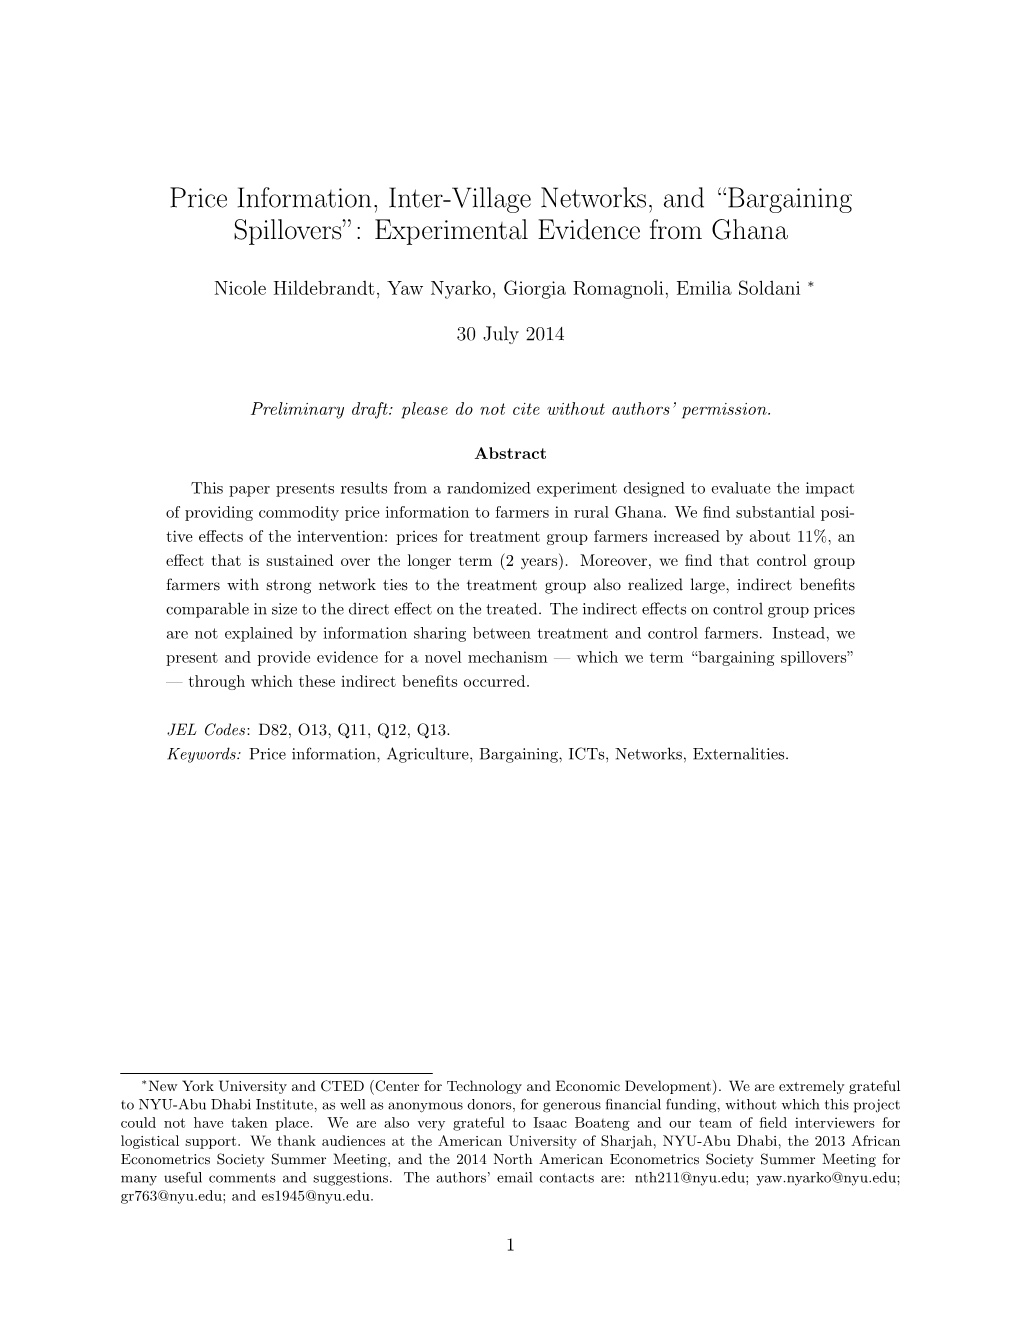 Price Information, Inter-Village Networks, and “Bargaining Spillovers”: Experimental Evidence from Ghana